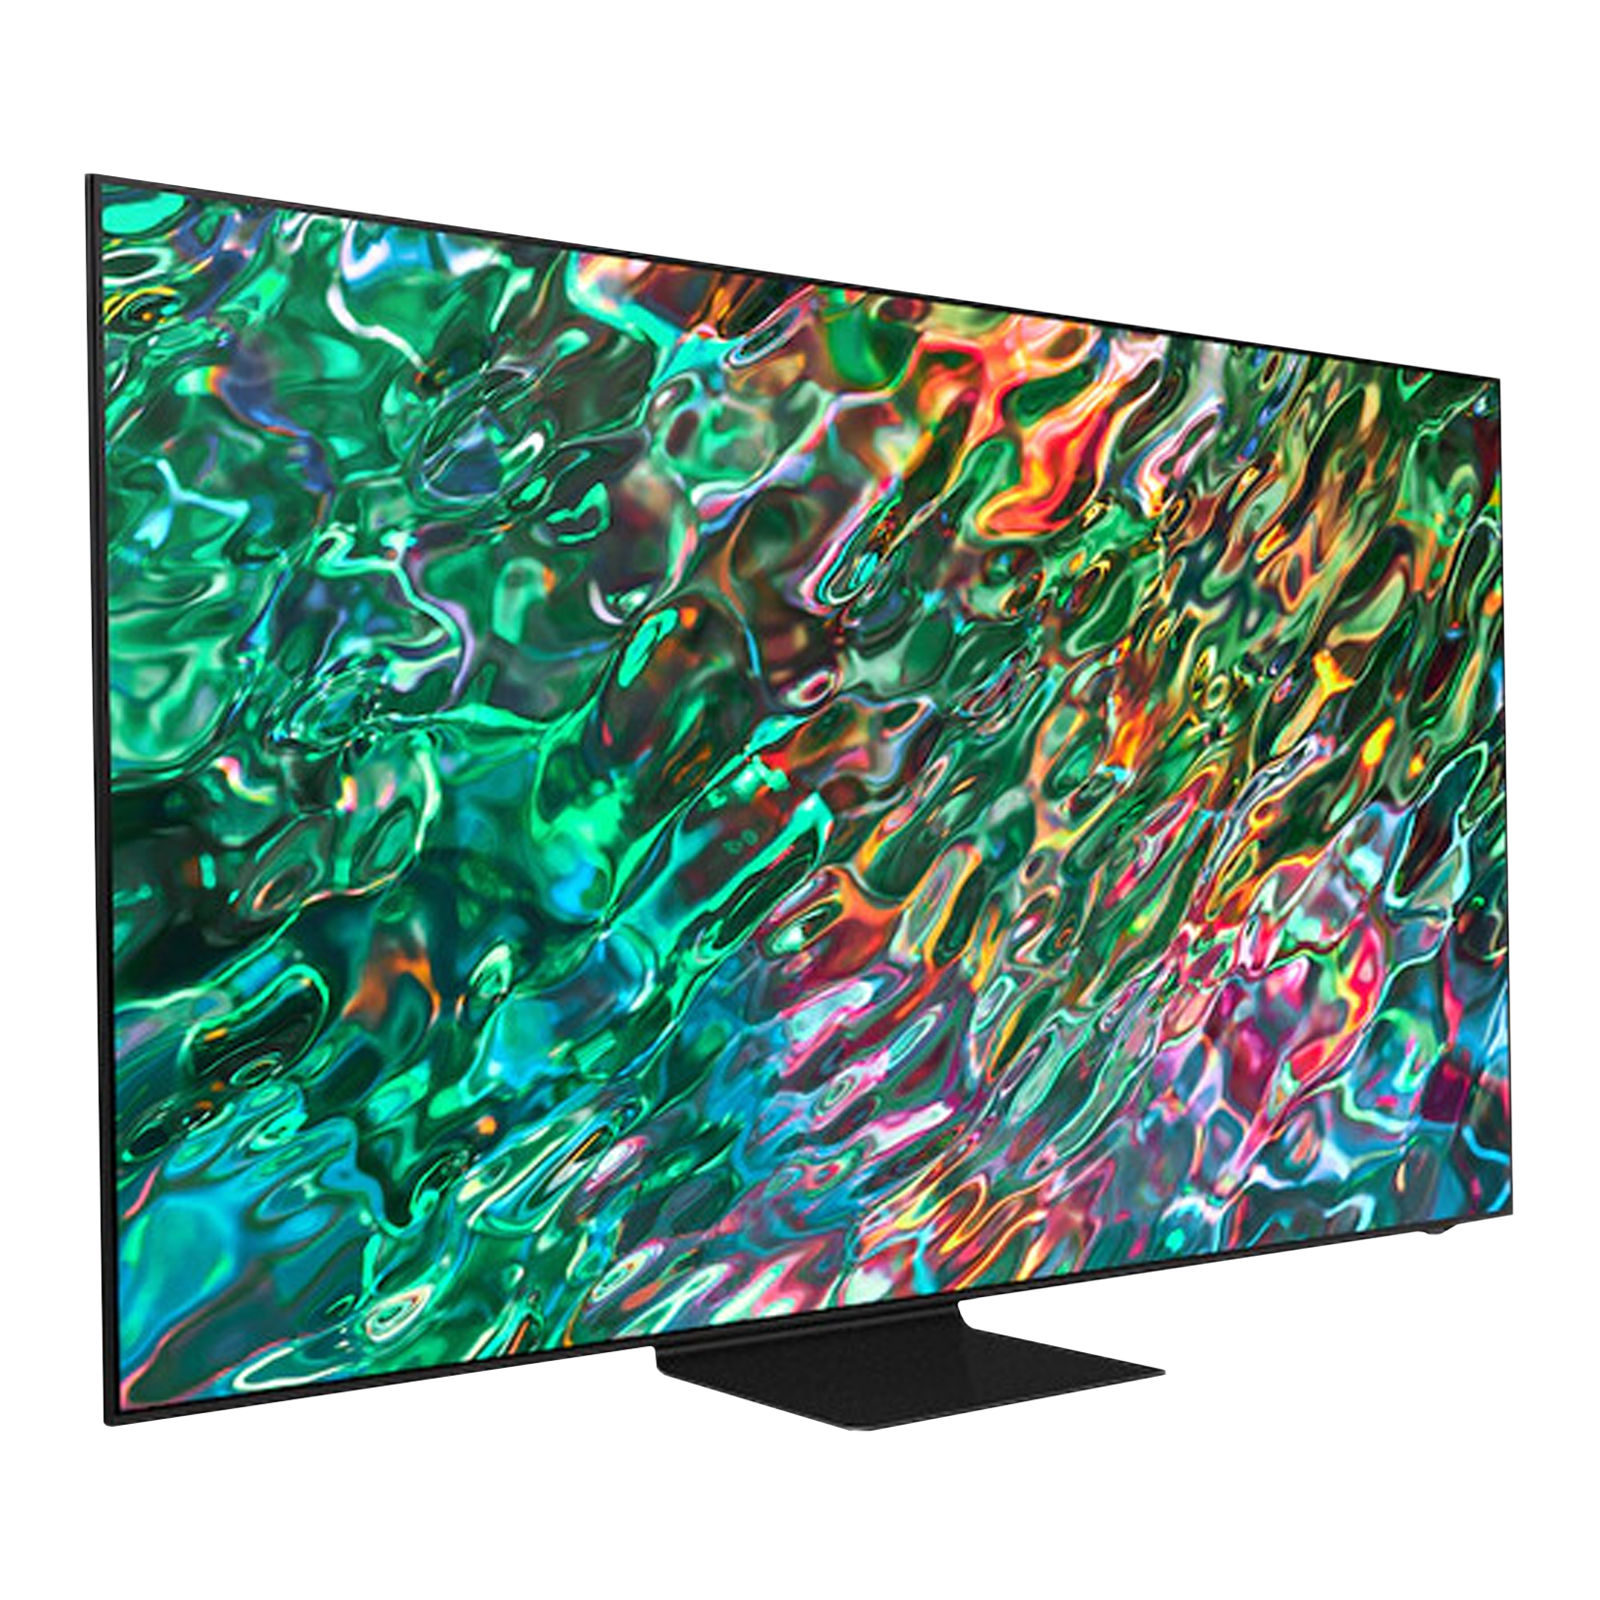 SAMSUNG Series 9 189 cm (75 inch) QLED 4K Ultra HD Tizen TV with Alexa Compatibility_4